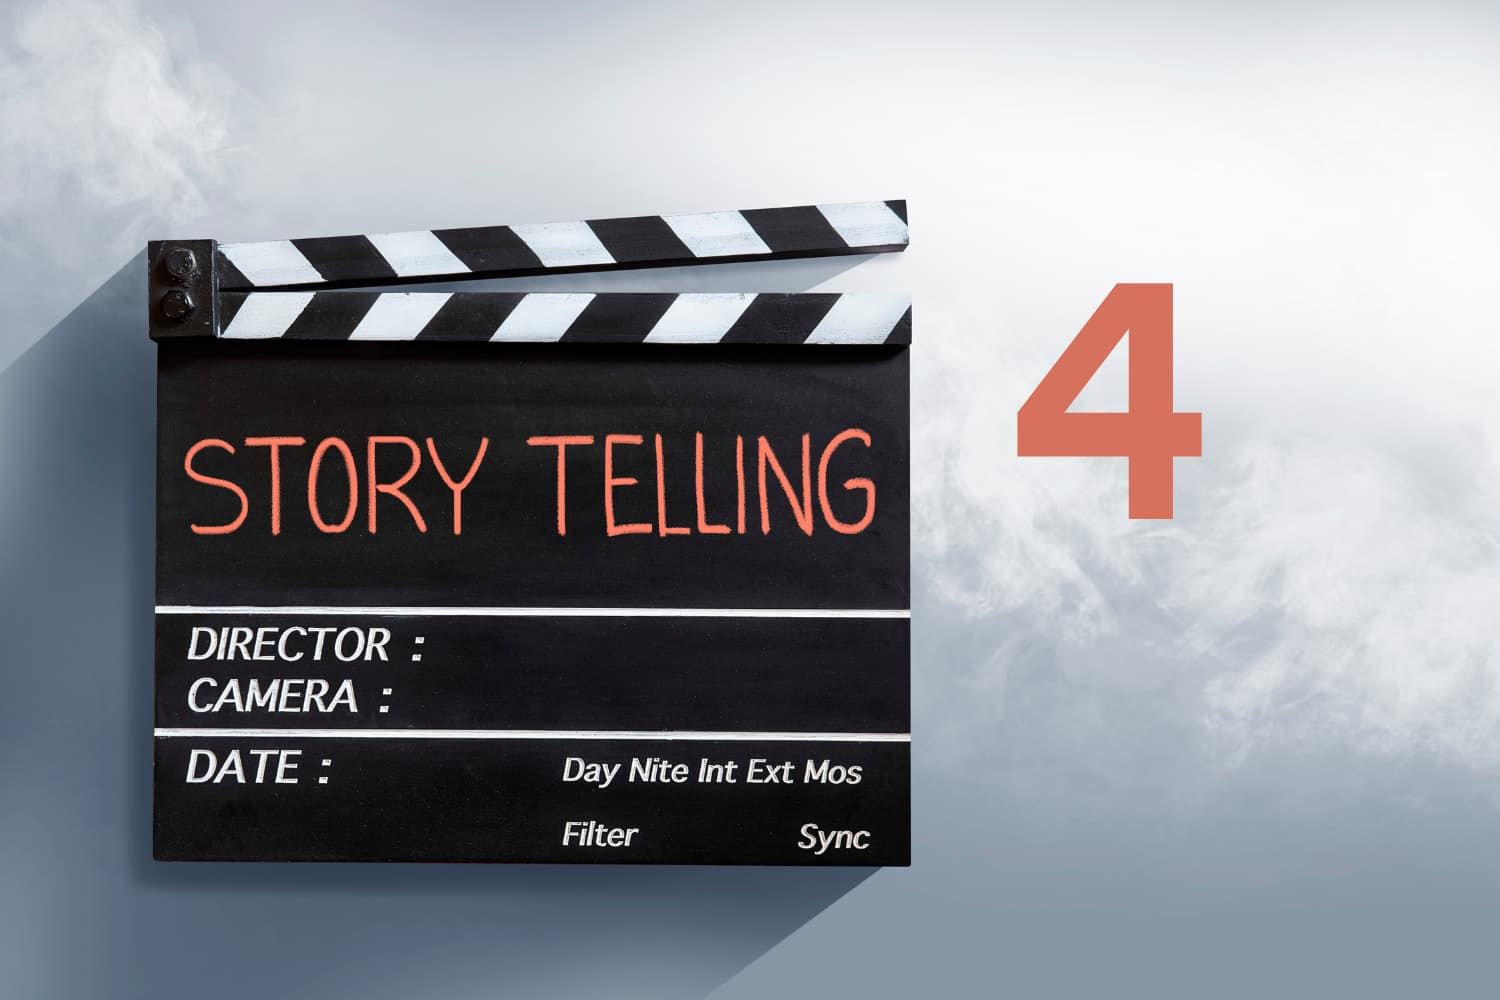 Storytellingtips%20-%20NT%20Teaching%20on%20the%20good%20shepherd%20-%20Four%20tips-75f33789 Caring for each other